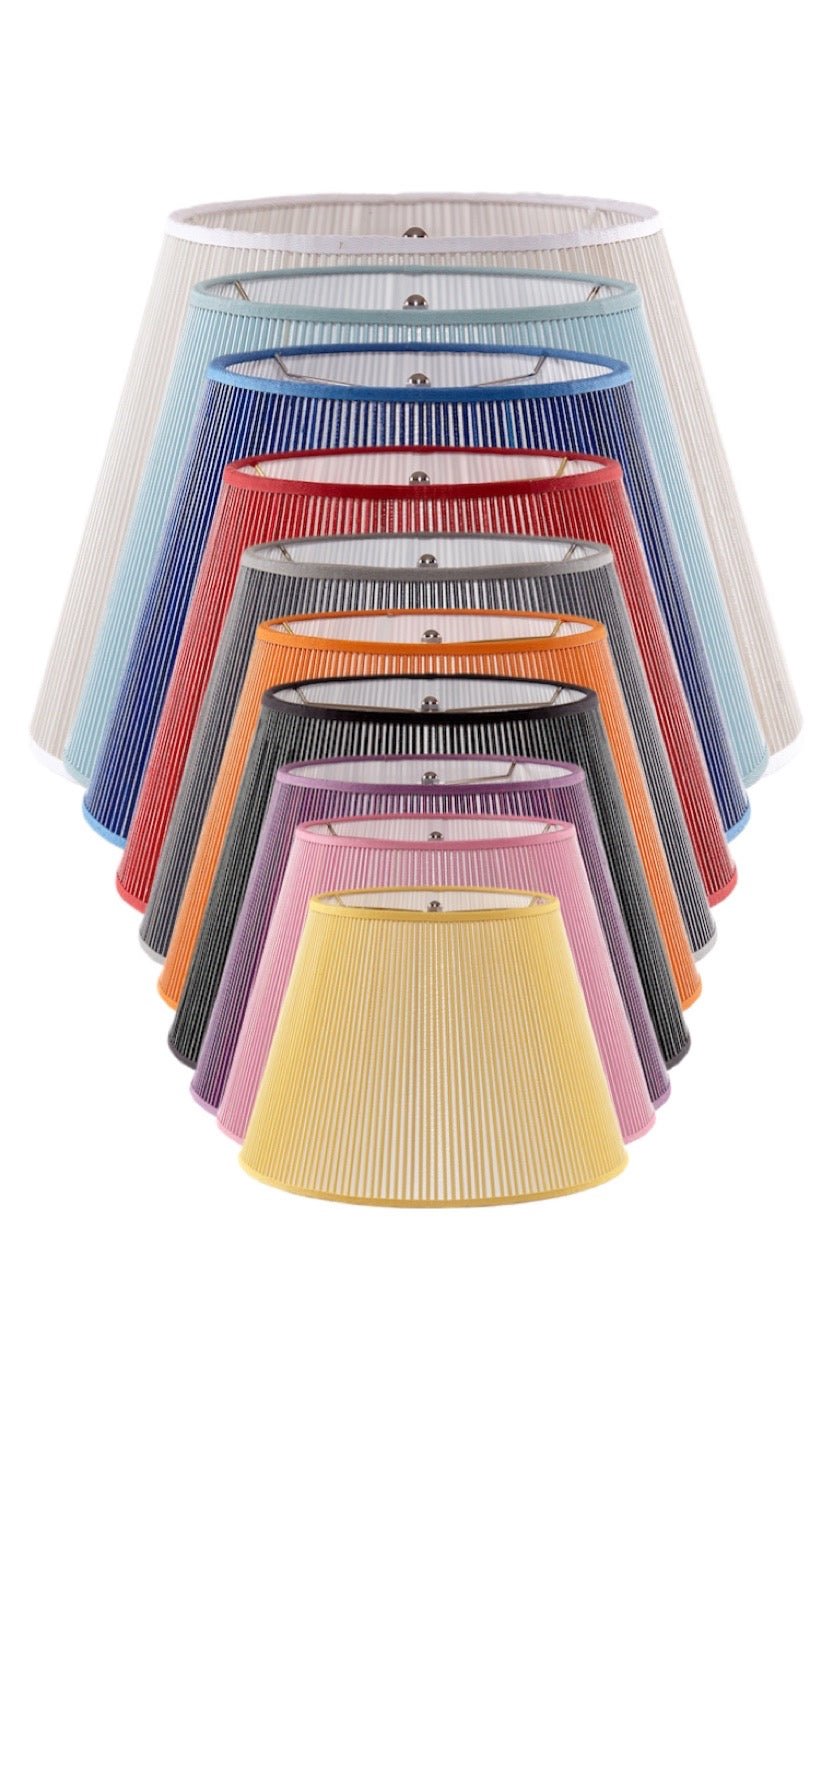 Chandelier Lamp Stick Shade - Available in 3 sizes and 14 colors - Lux Lamp Shades